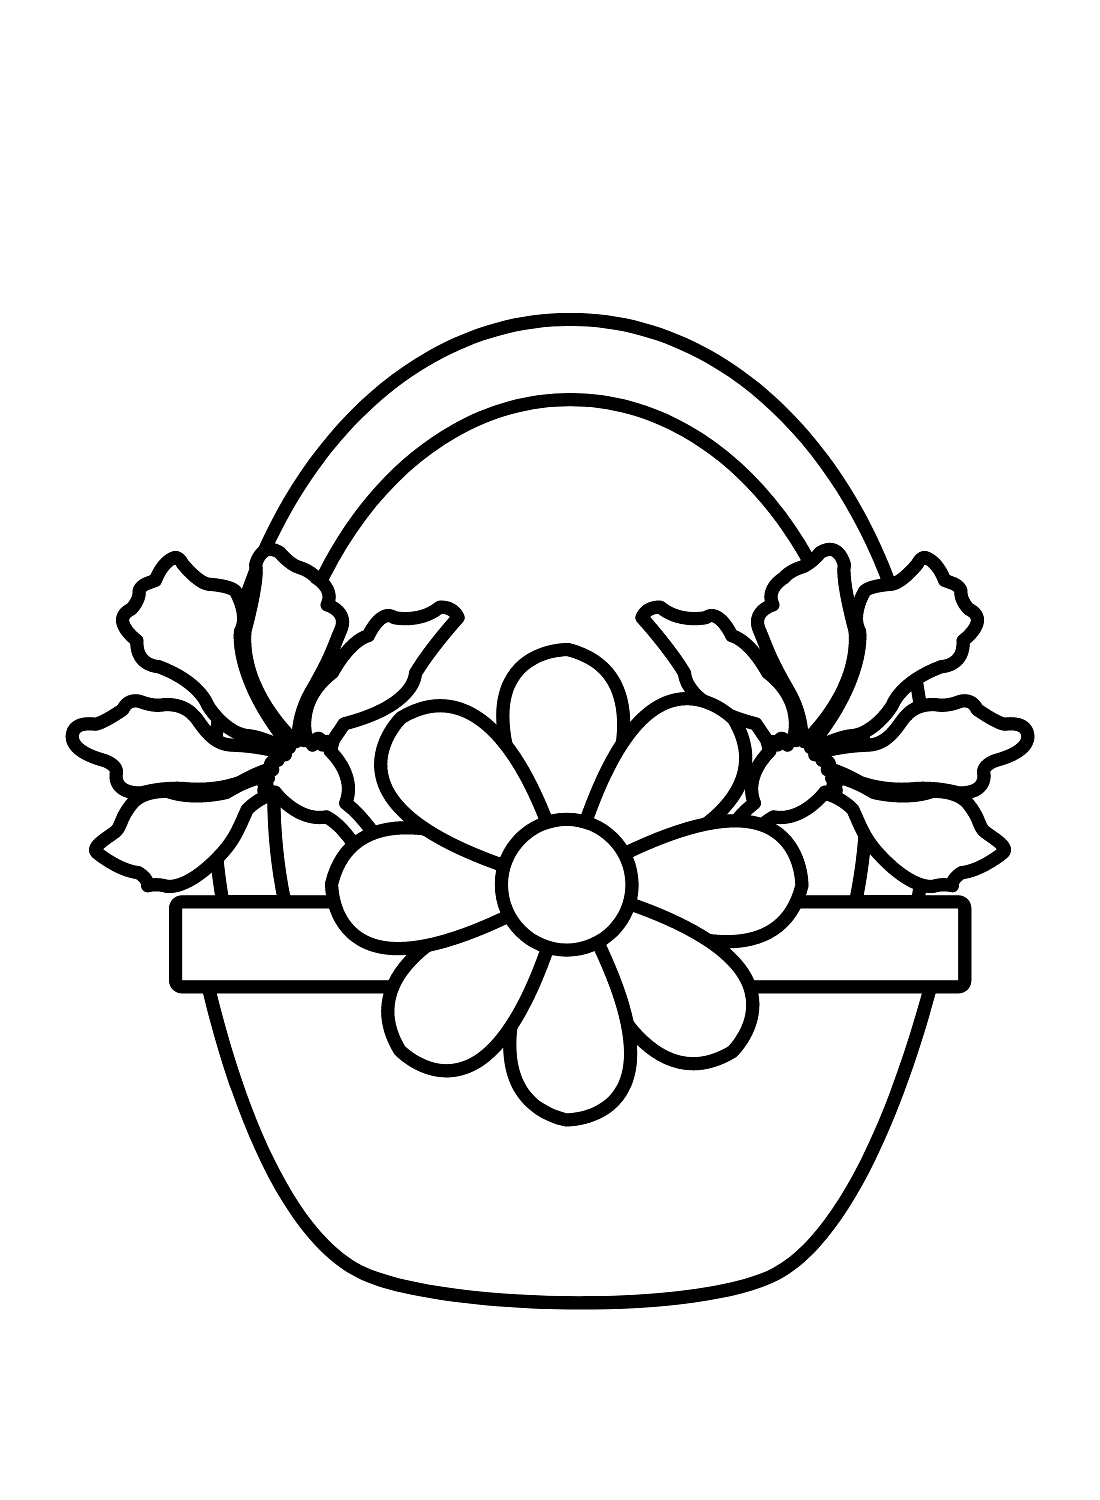 Draw Flowers Basket Coloring Page